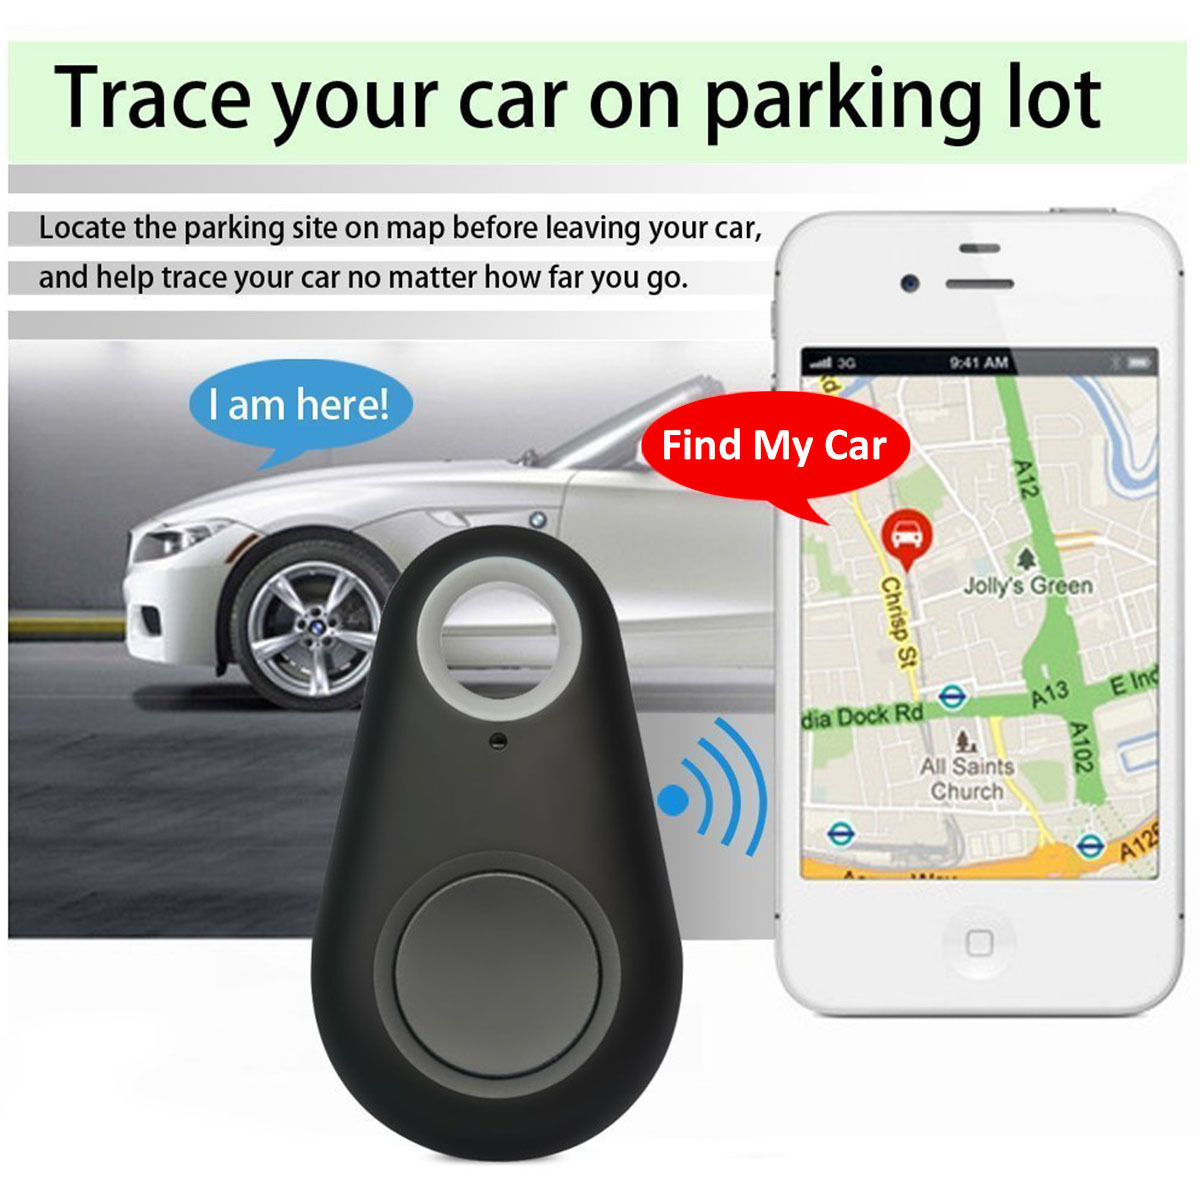 Smart Bluetooth Tracer GPS Locator Phone Keys Wallet Child Luggage Anti-Lost Finder